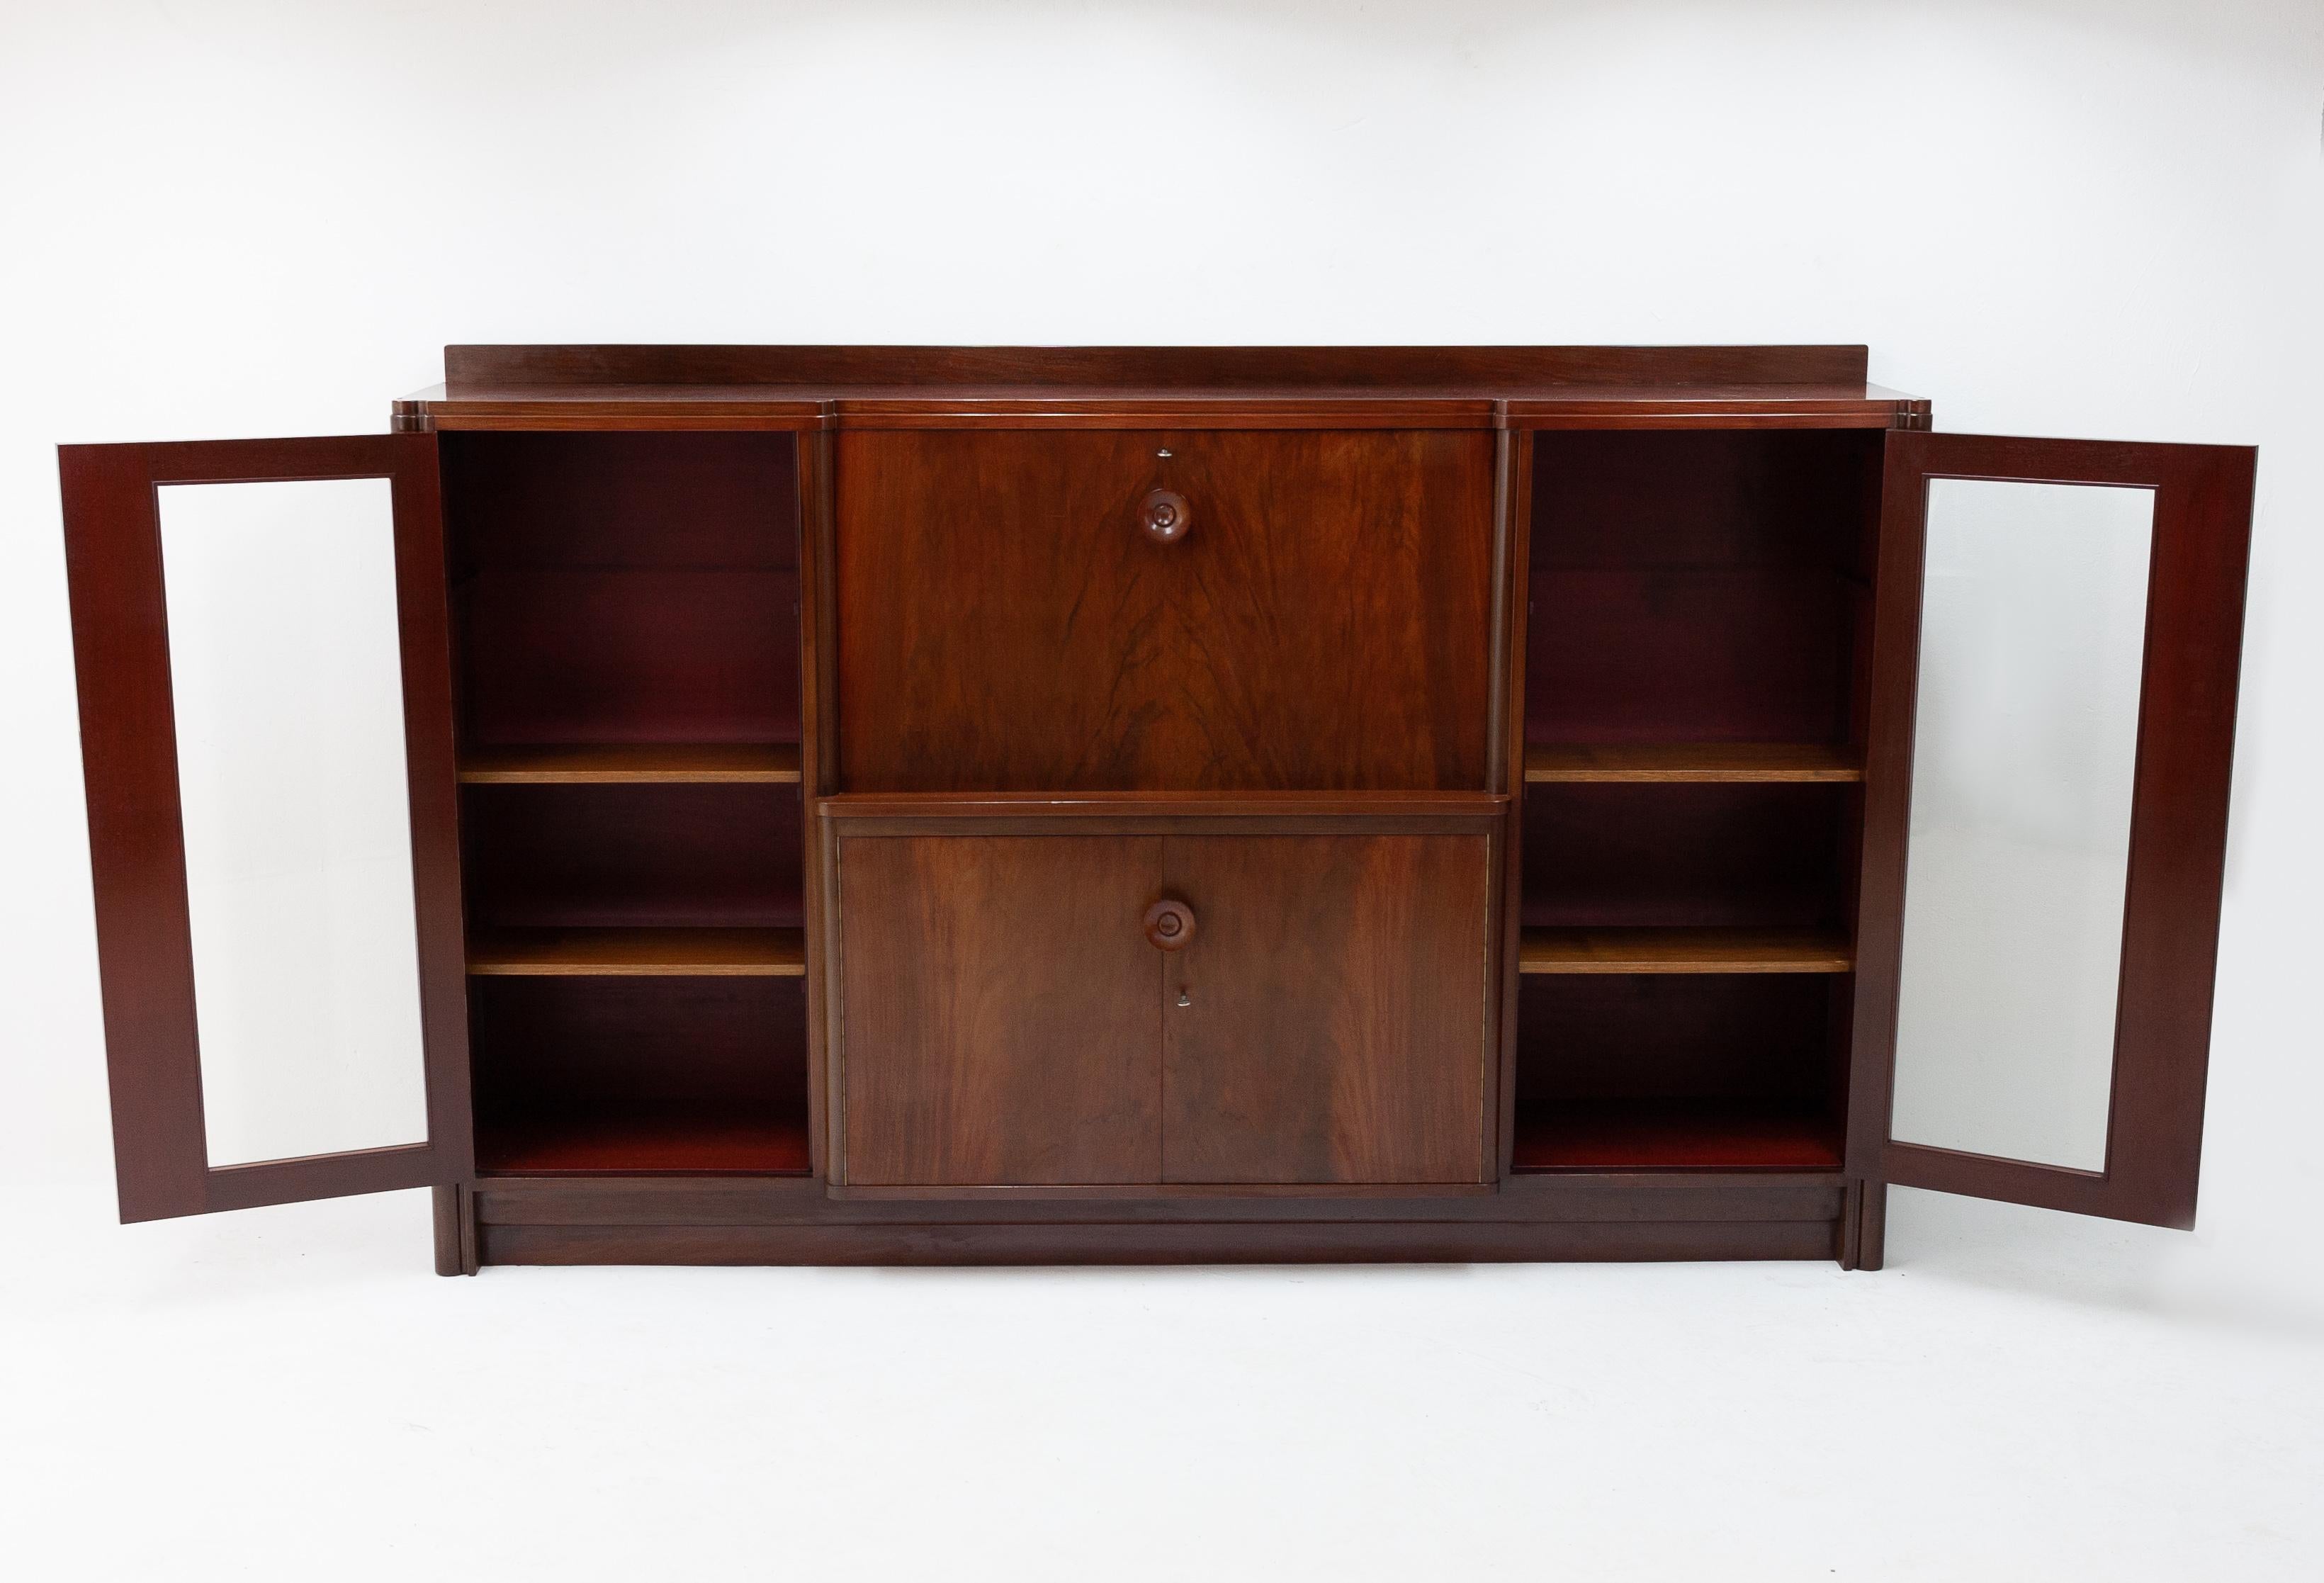 Beautiful Art Deco buffet cabinet. Designed by G.J. Vastenholt and executed by Max Coini Amsterdam, 1920. Rare handmade monumental piece of furniture in oak and mahogany.

Max Coini's company existed in Amsterdam until 1933 and was one of the